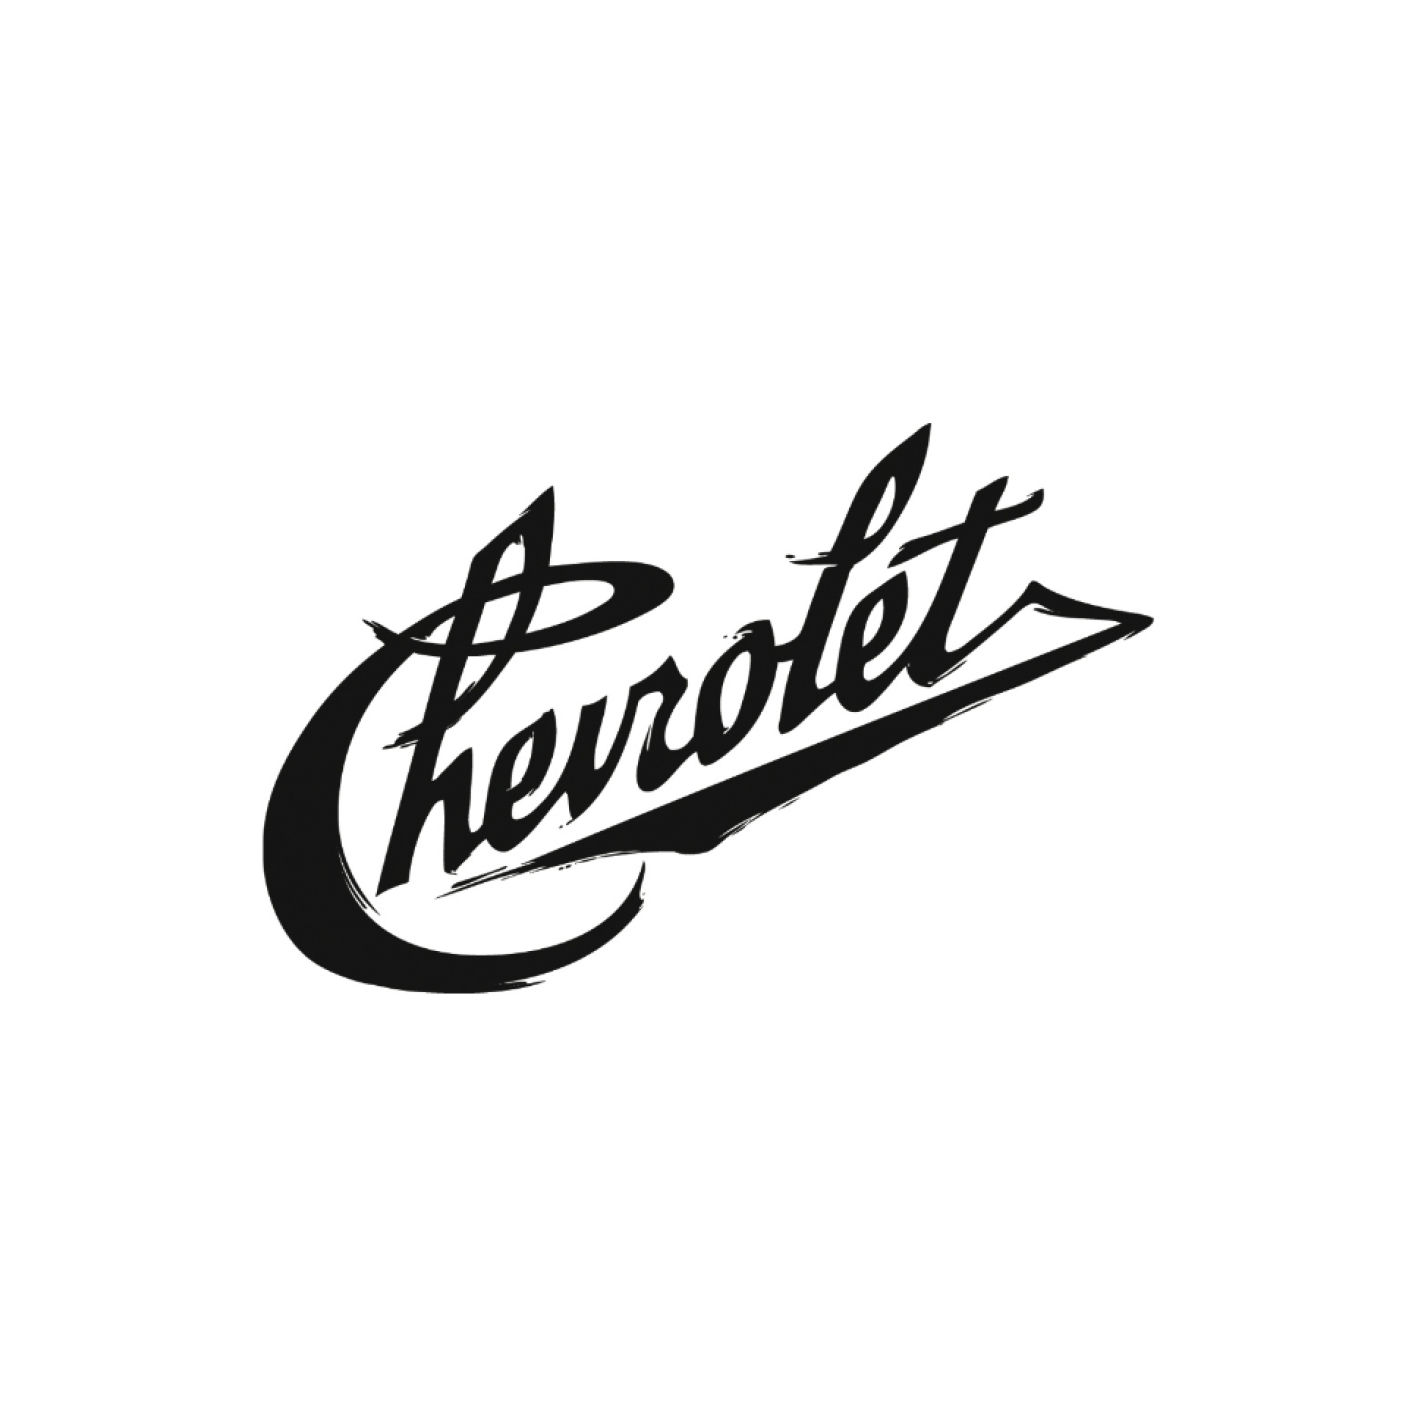 "Chevy Classic" logo, Graphis. 